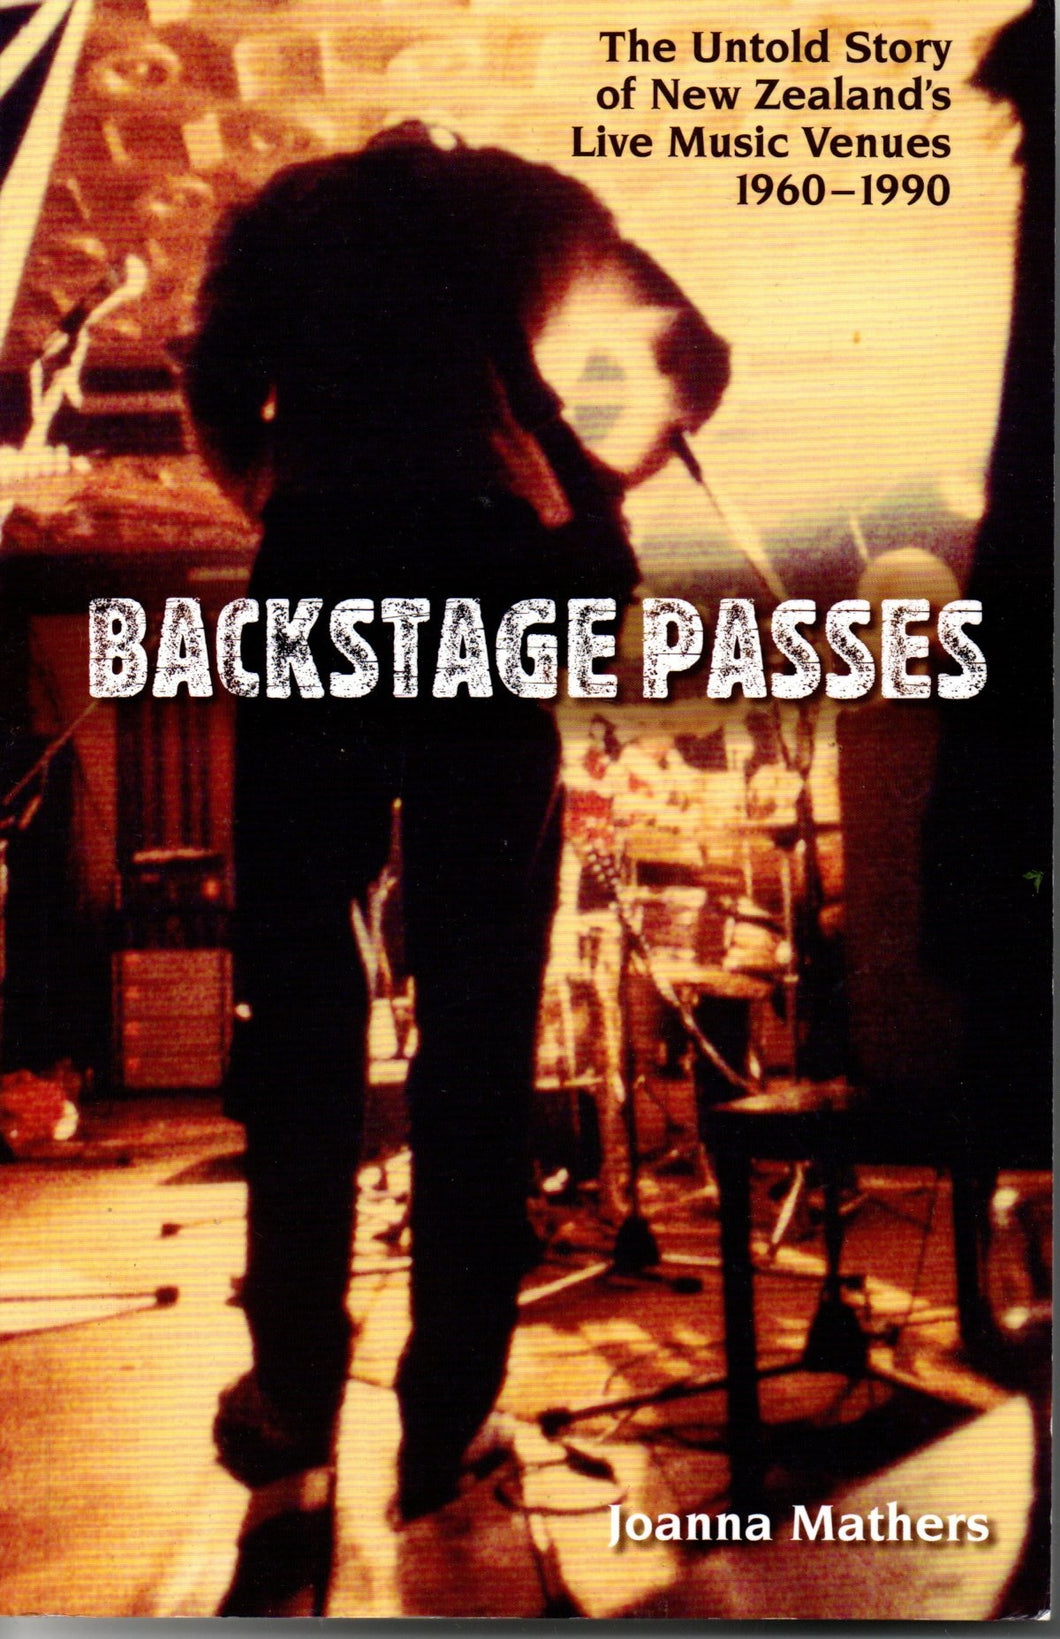 Backstage Pass- The untold history of New Zealand's live music venues 1960 - 1990